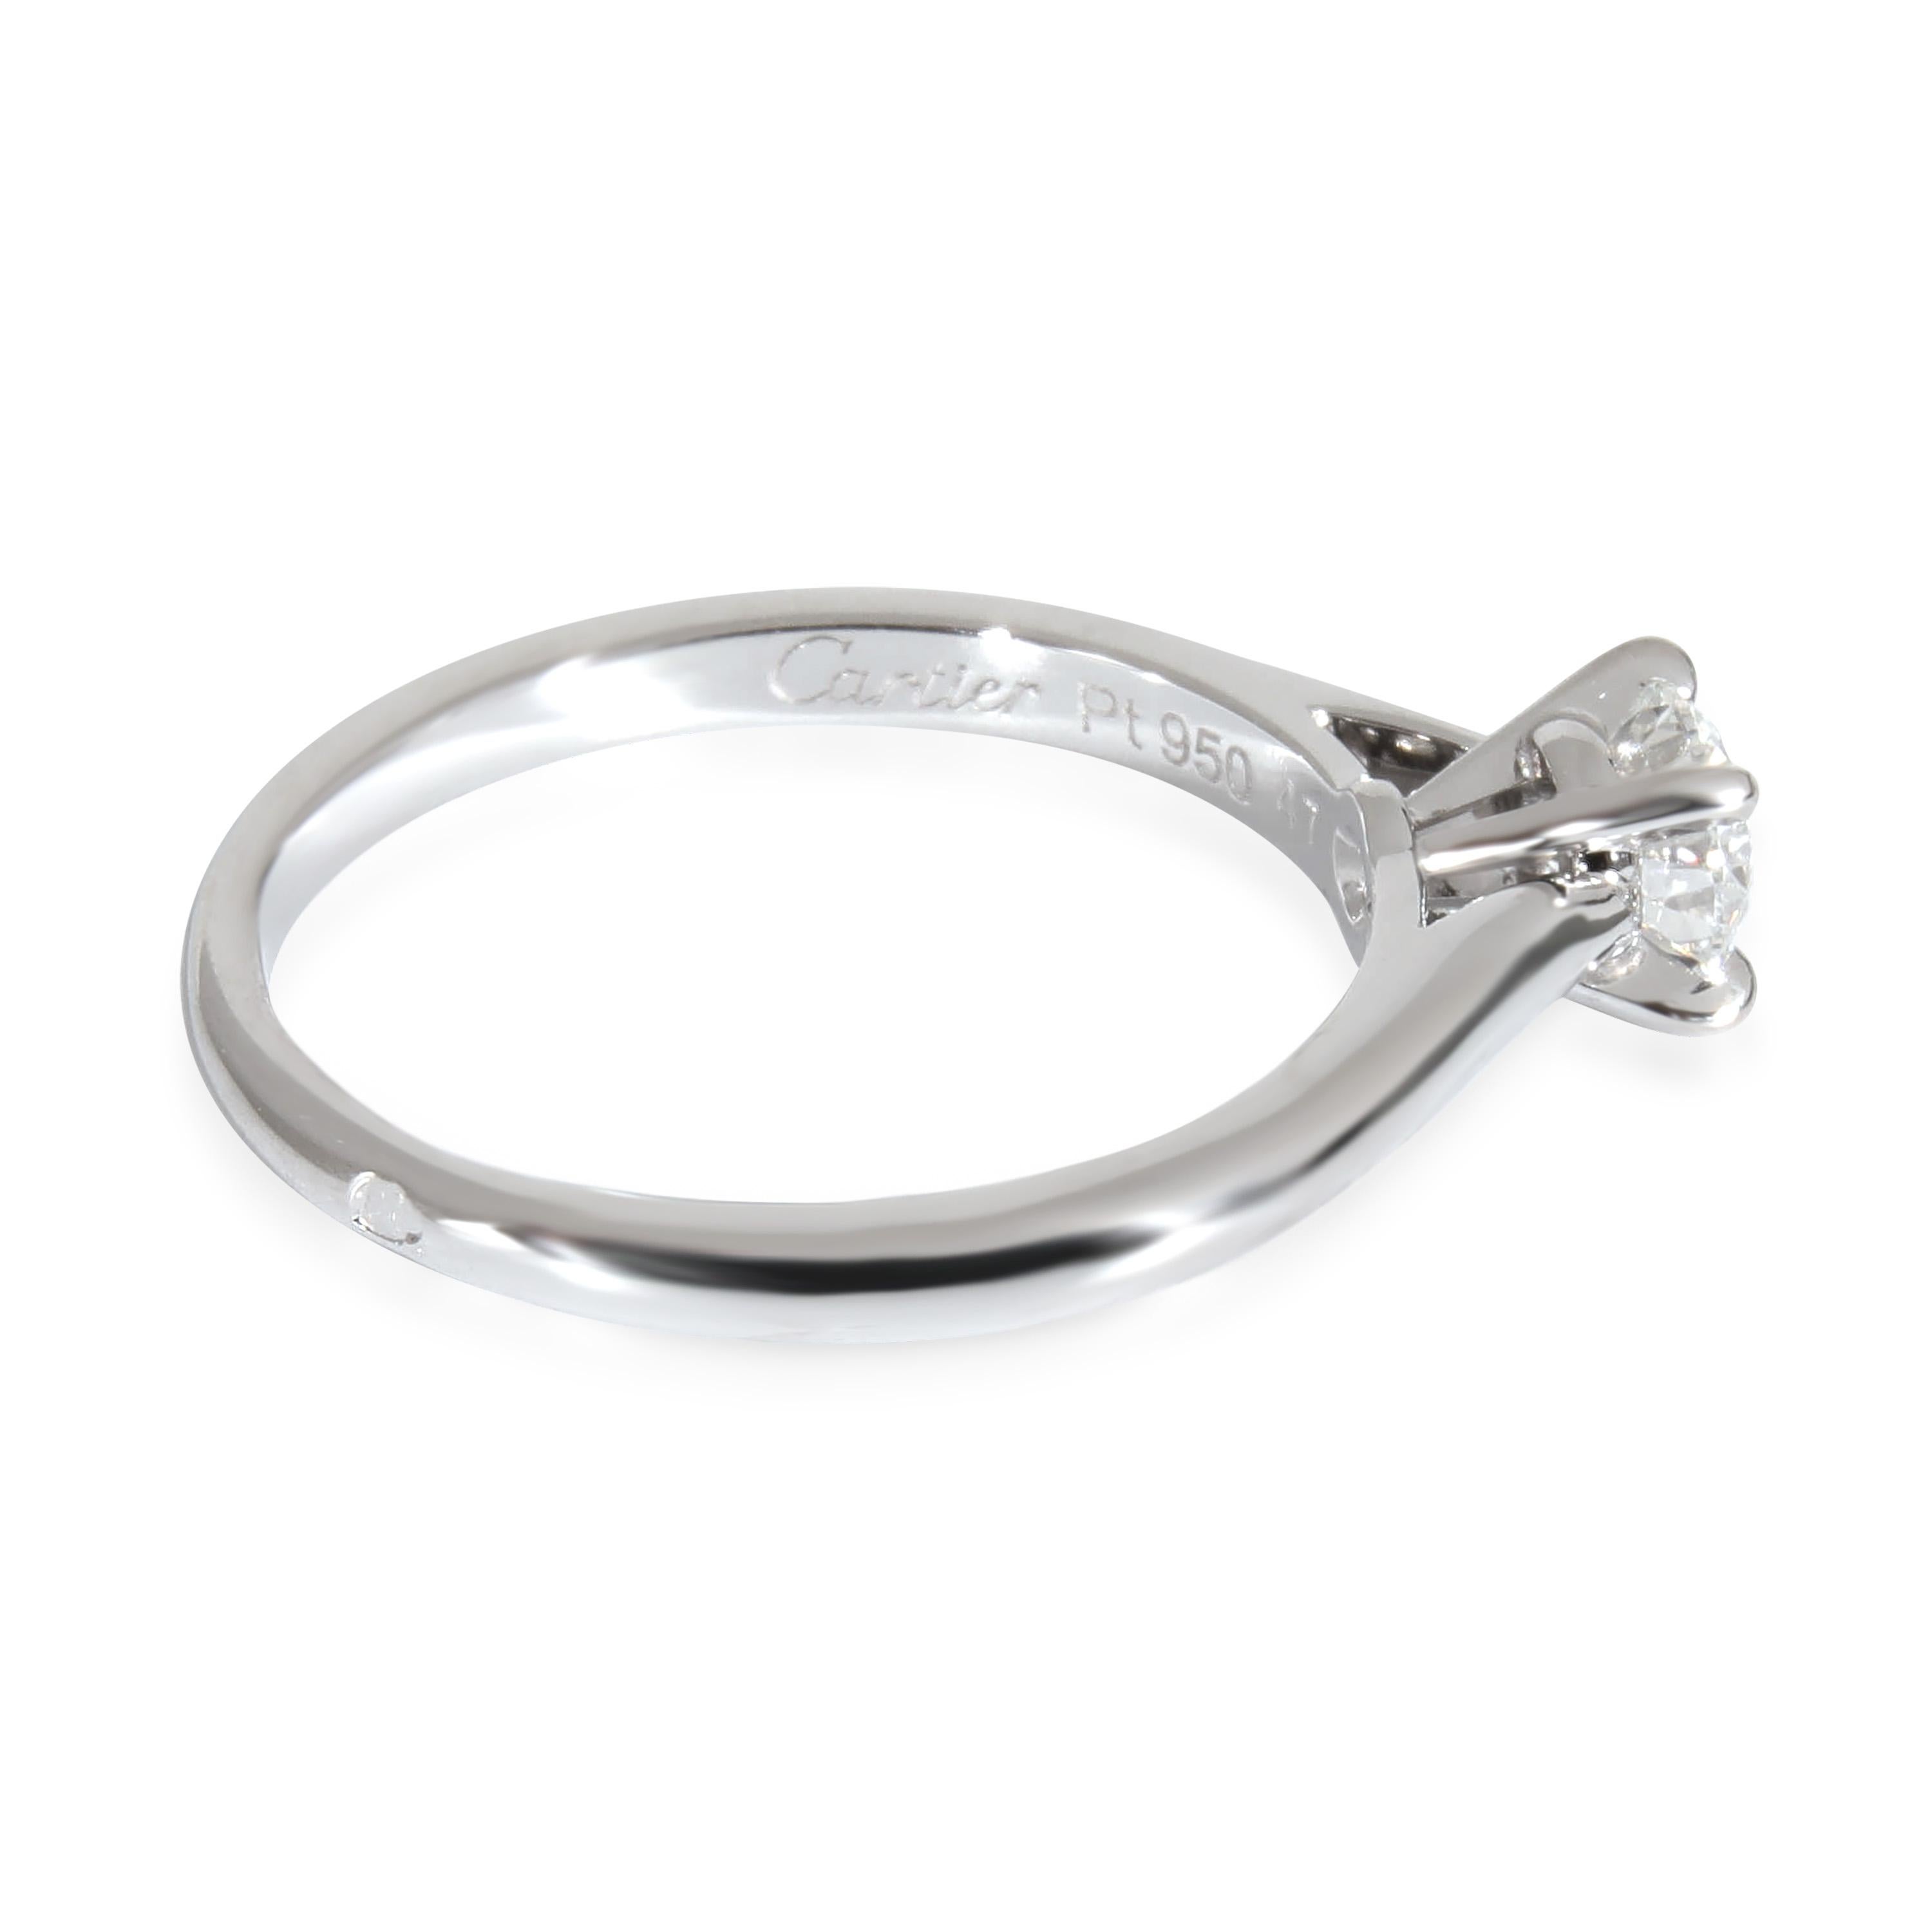 Cartier 1895 Diamond Engagement Ring in  Platinum E VS2 0.31 CTW

PRIMARY DETAILS
SKU: 131330
Listing Title: Cartier 1895 Diamond Engagement Ring in  Platinum E VS2 0.31 CTW
Condition Description: A collection that started with a ring. The solitaire